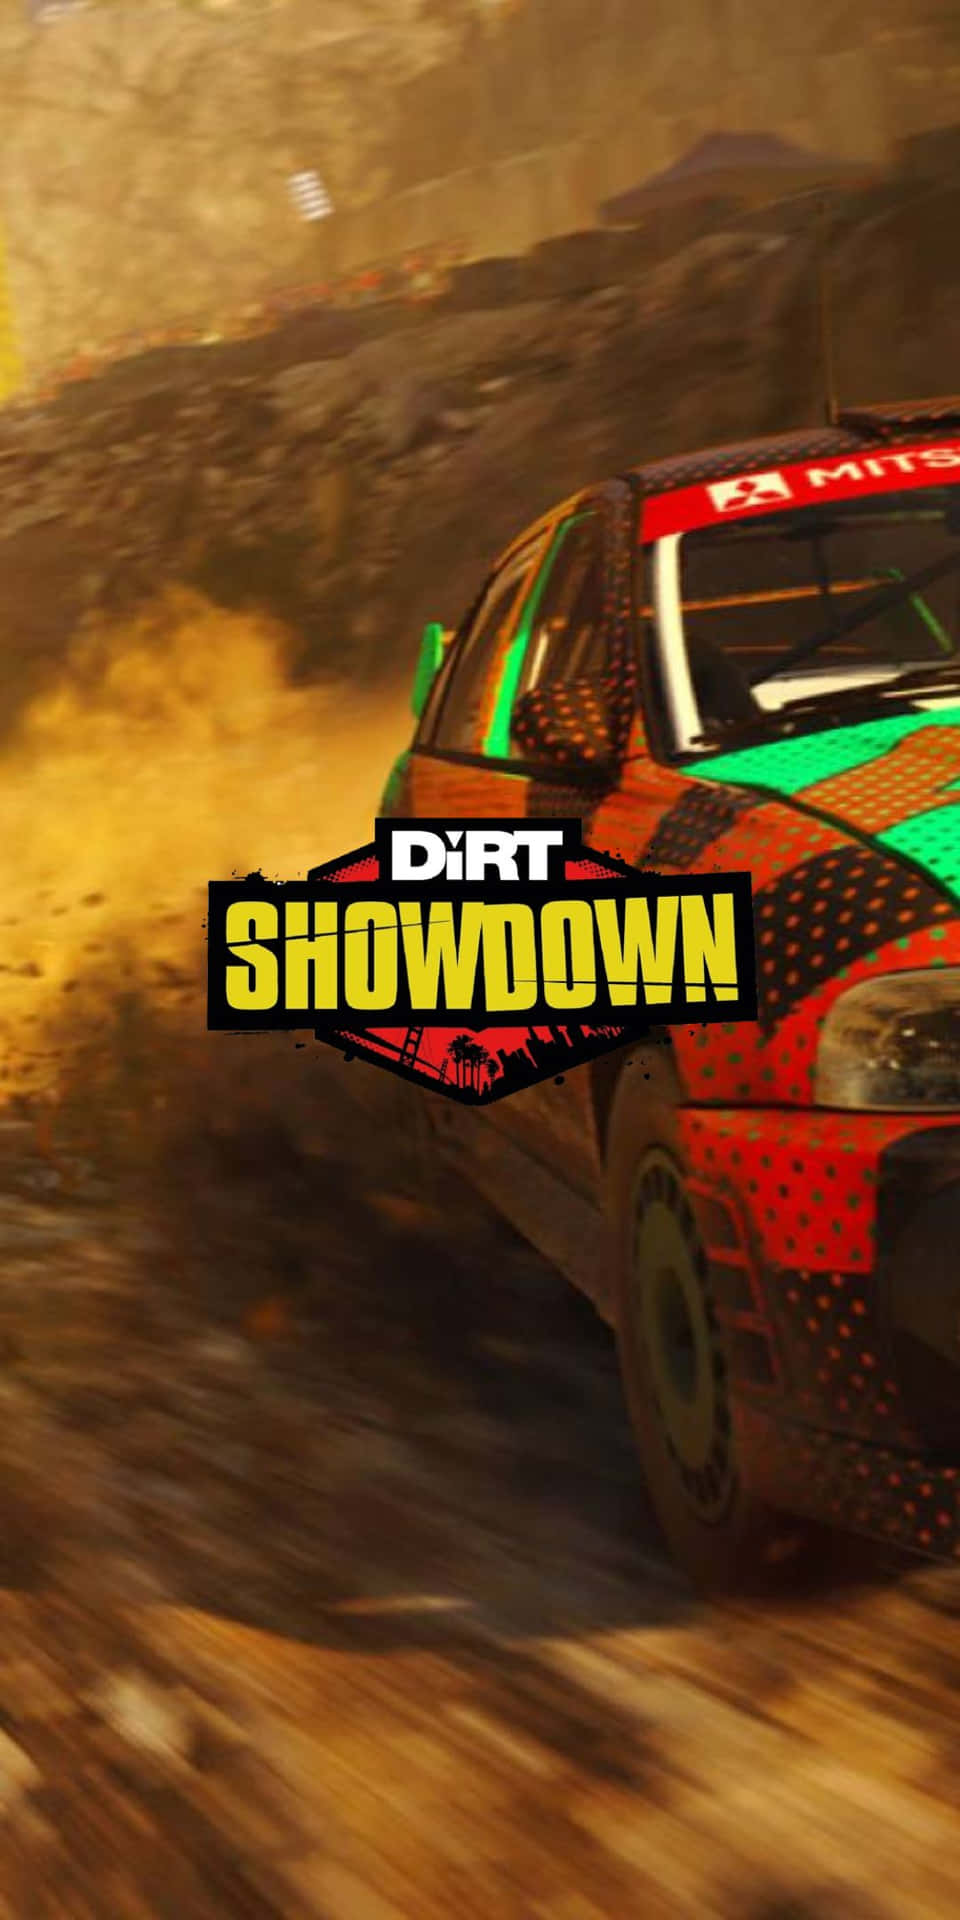 Race to the finish in Pixel 3 Dirt Showdown!